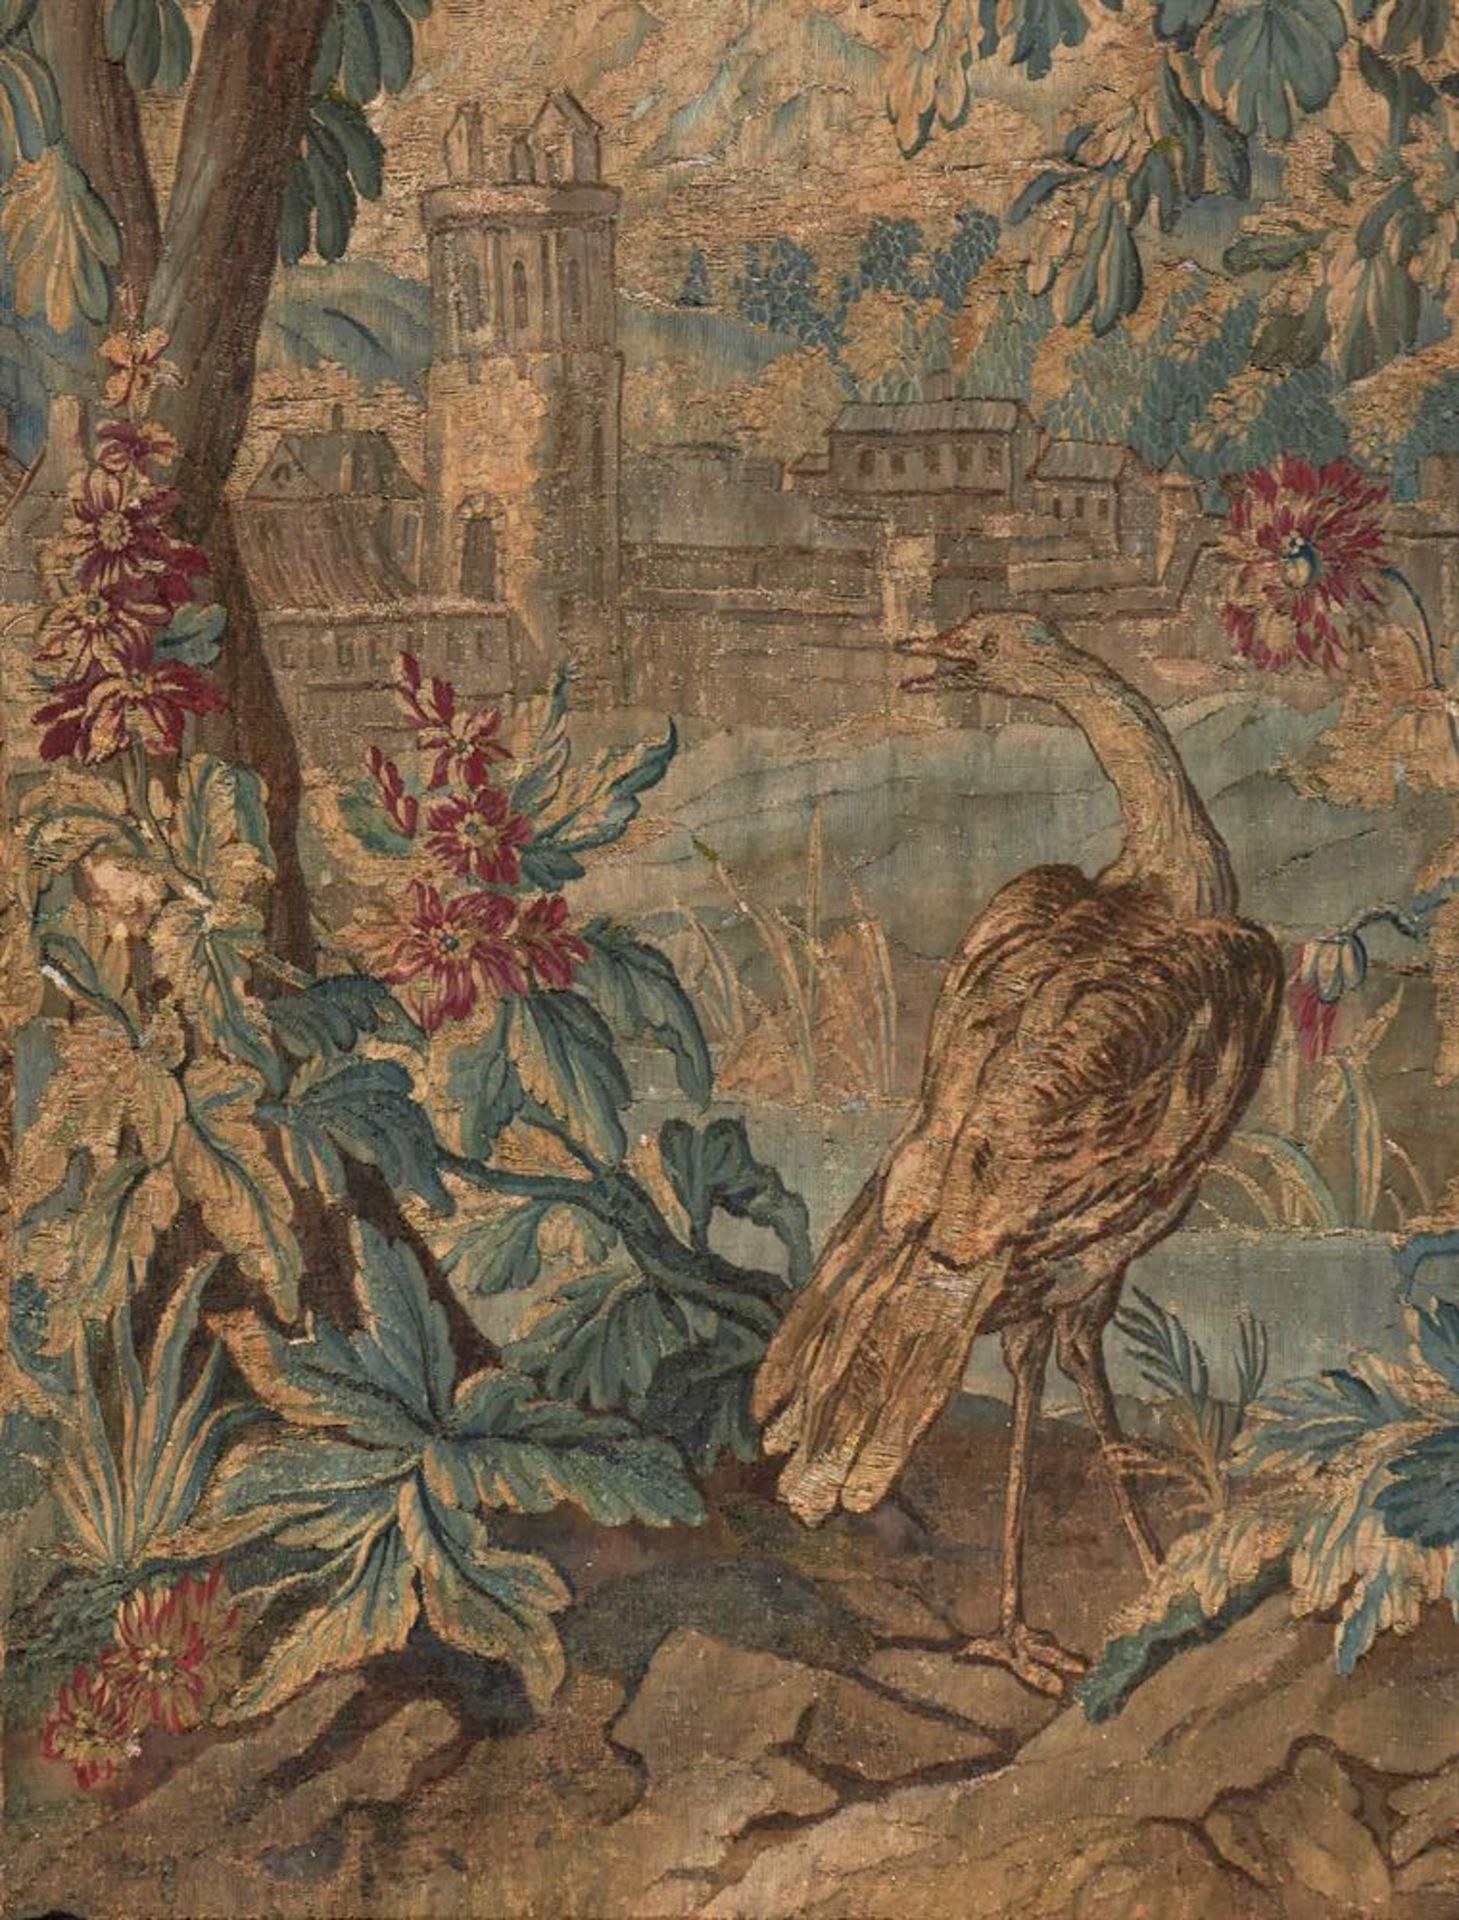 A FRENCH VERDURE TAPESTRY, EARLY 18TH CENTURY - Image 3 of 5